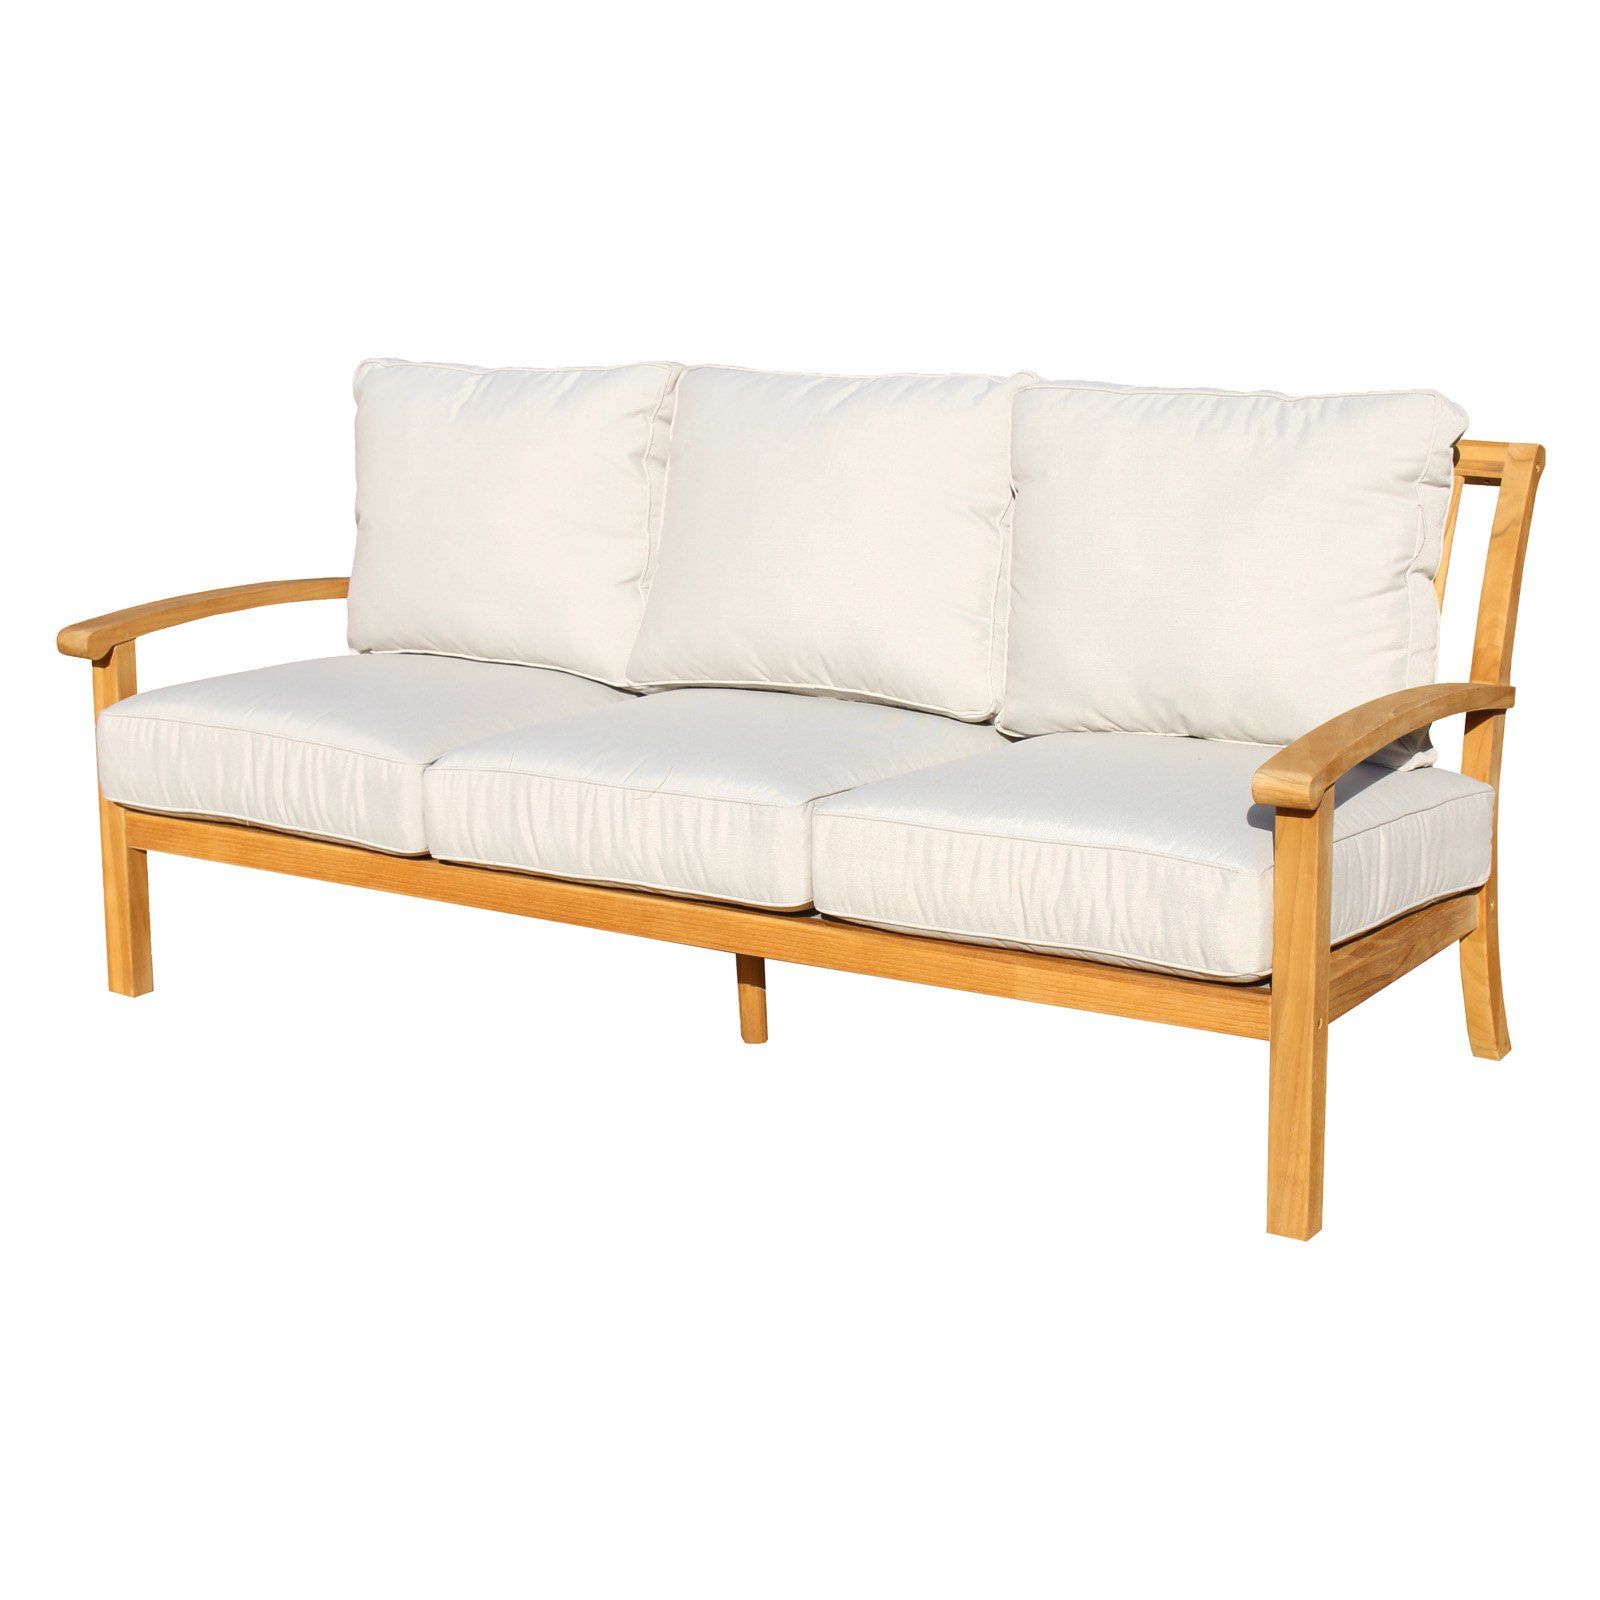 Most Recently Released Courtyard Casual Natural Teak Heritage Outdoor Sofa In 2019 Intended For Brunswick Teak Loveseats With Cushions (View 10 of 20)